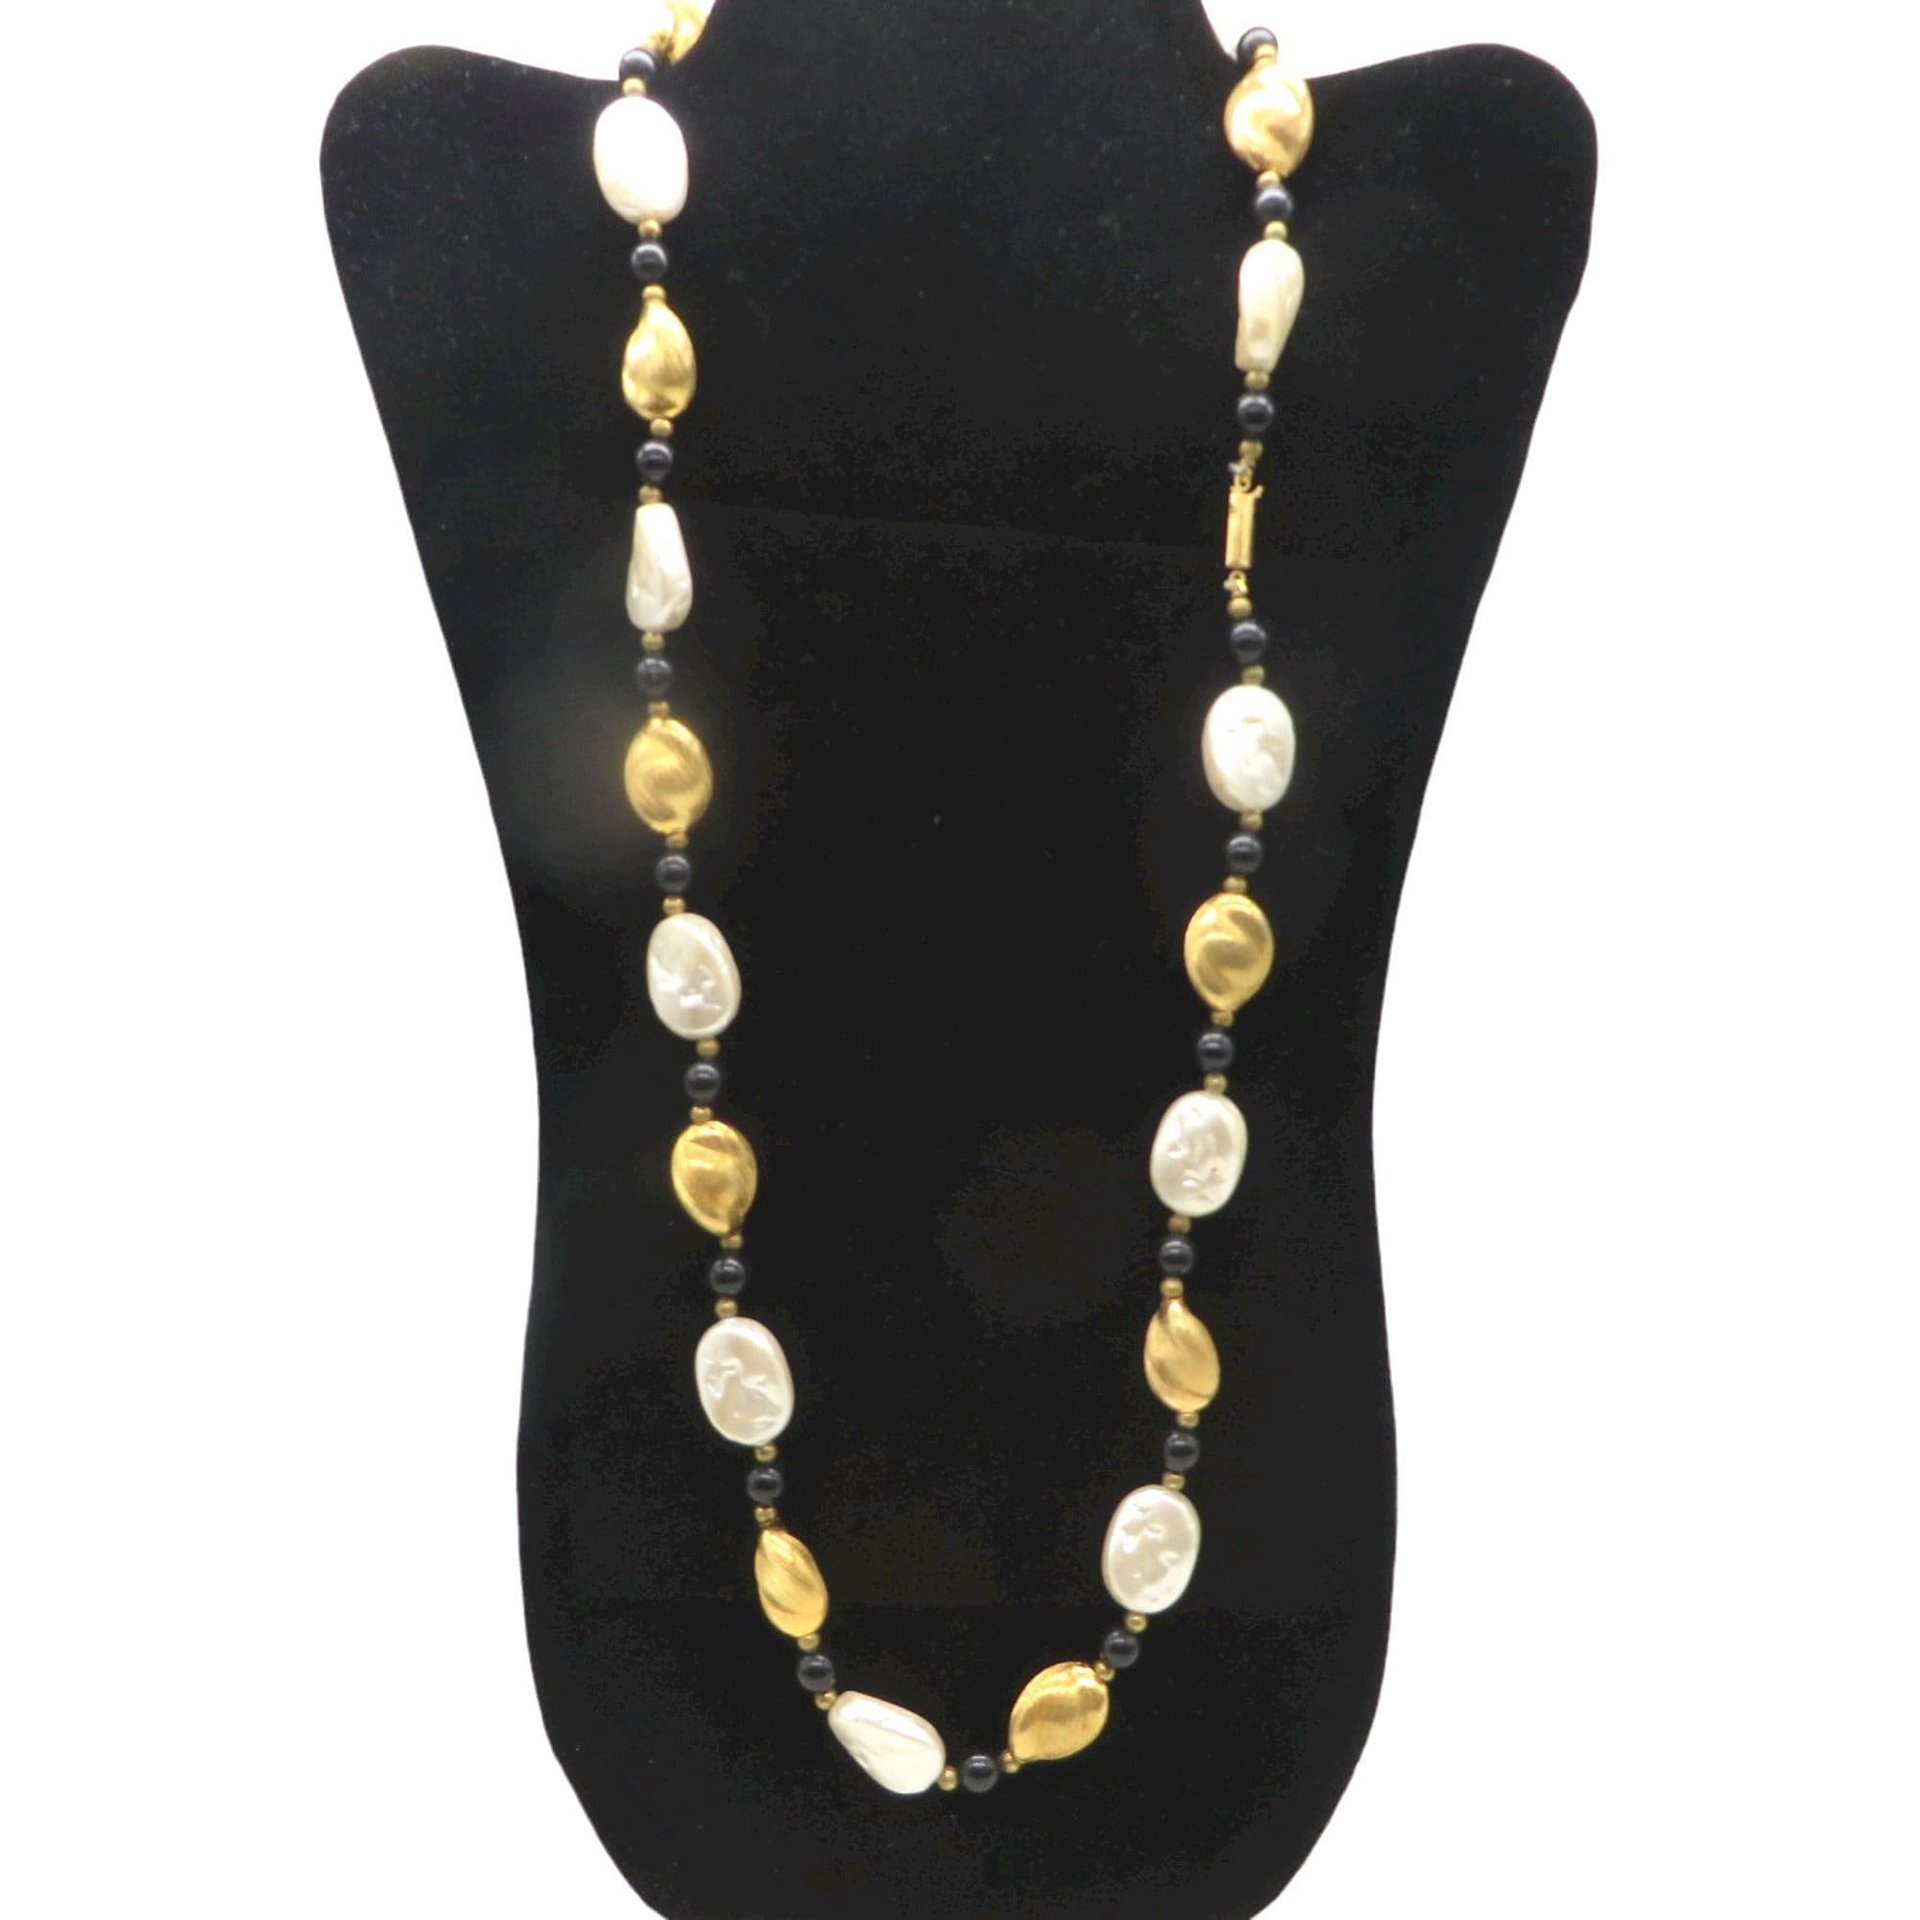 Black, White and Gold Frosted Glass Bead Necklace